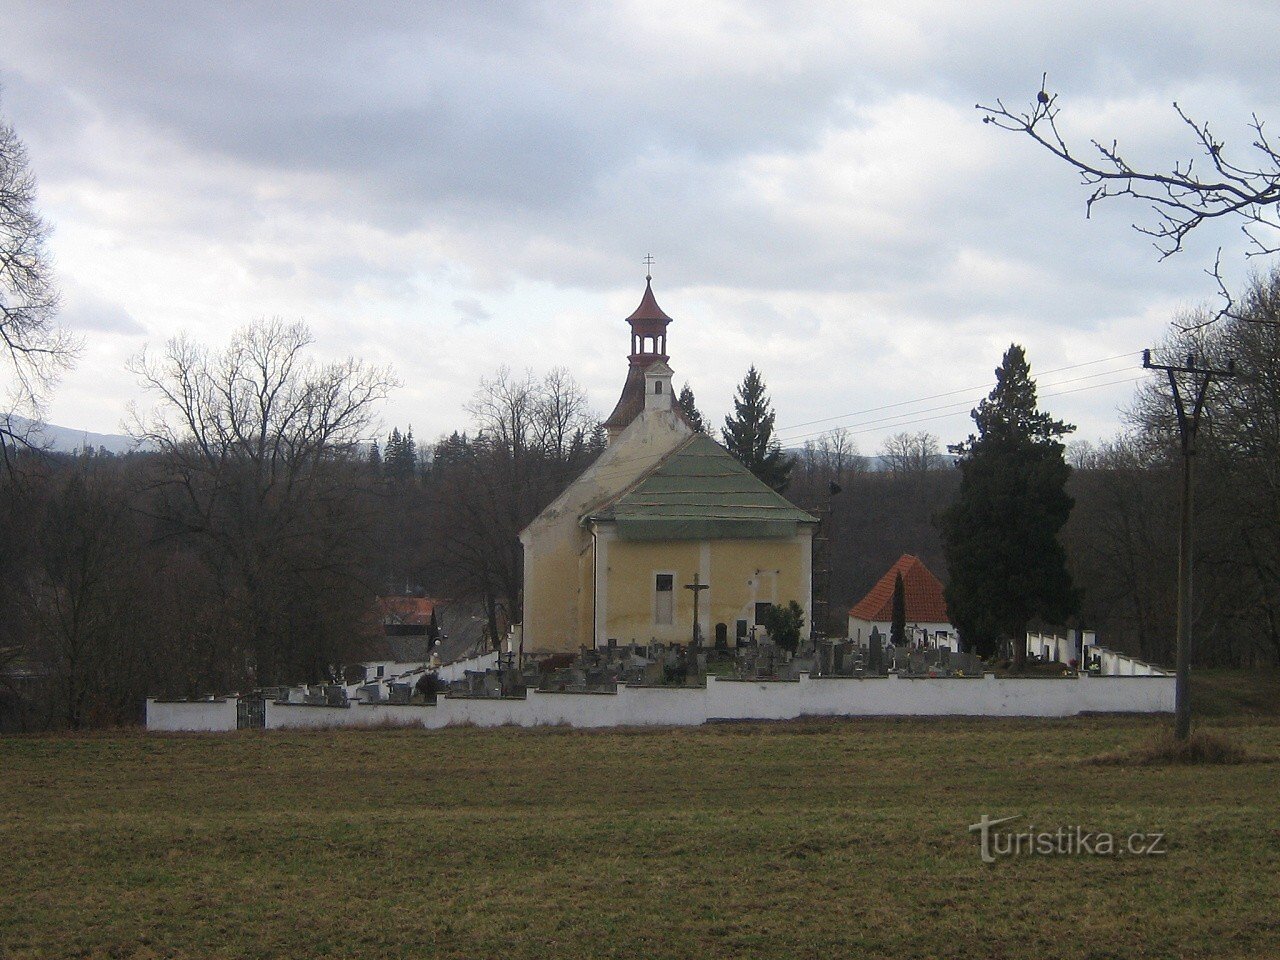 area of ​​the former castle with a church